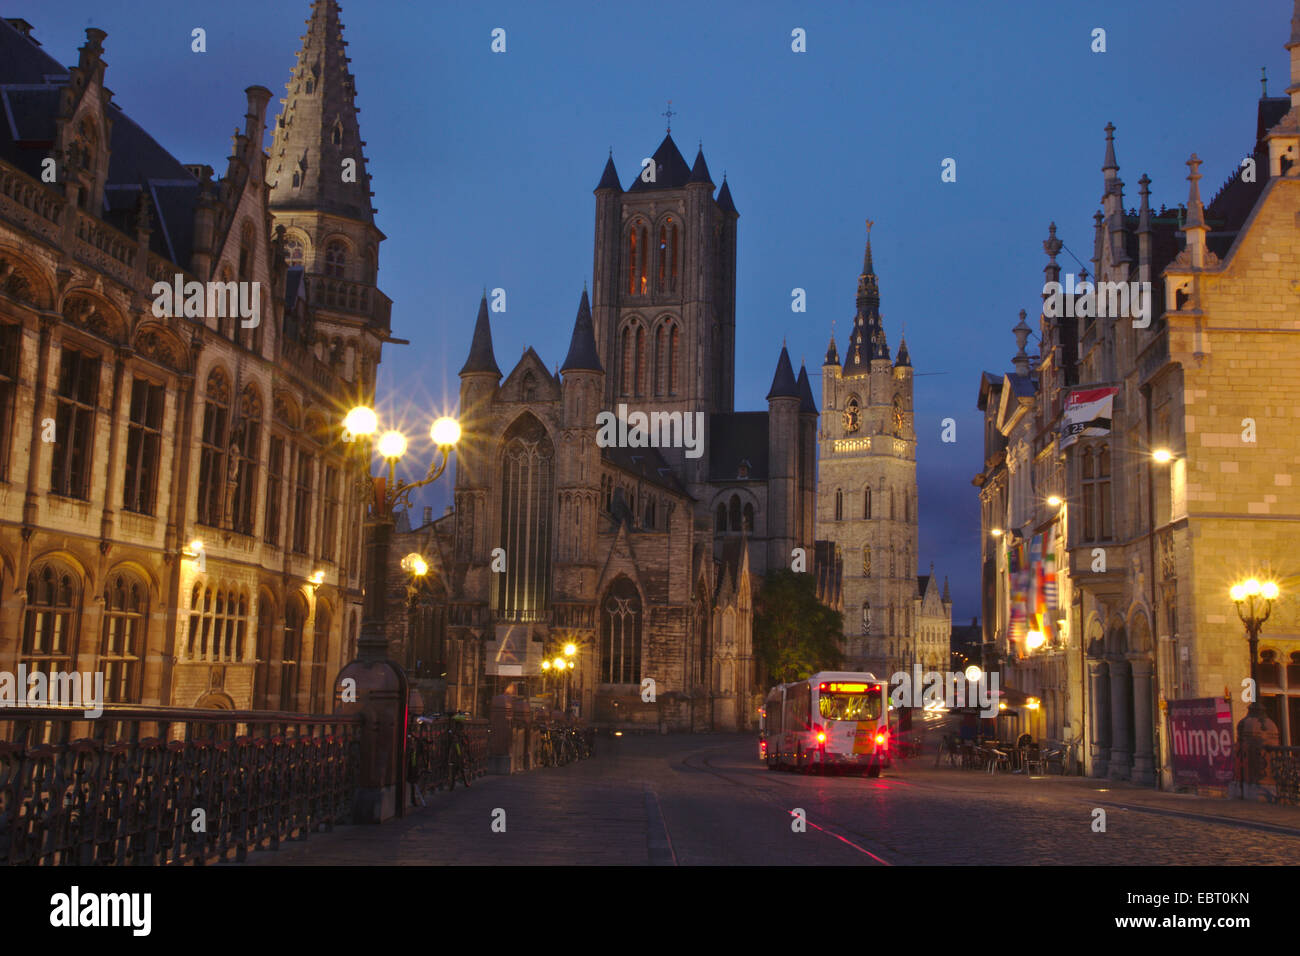 Saint Nicholas' Church and belfry in the late evening, Belgium, Gent Stock Photo